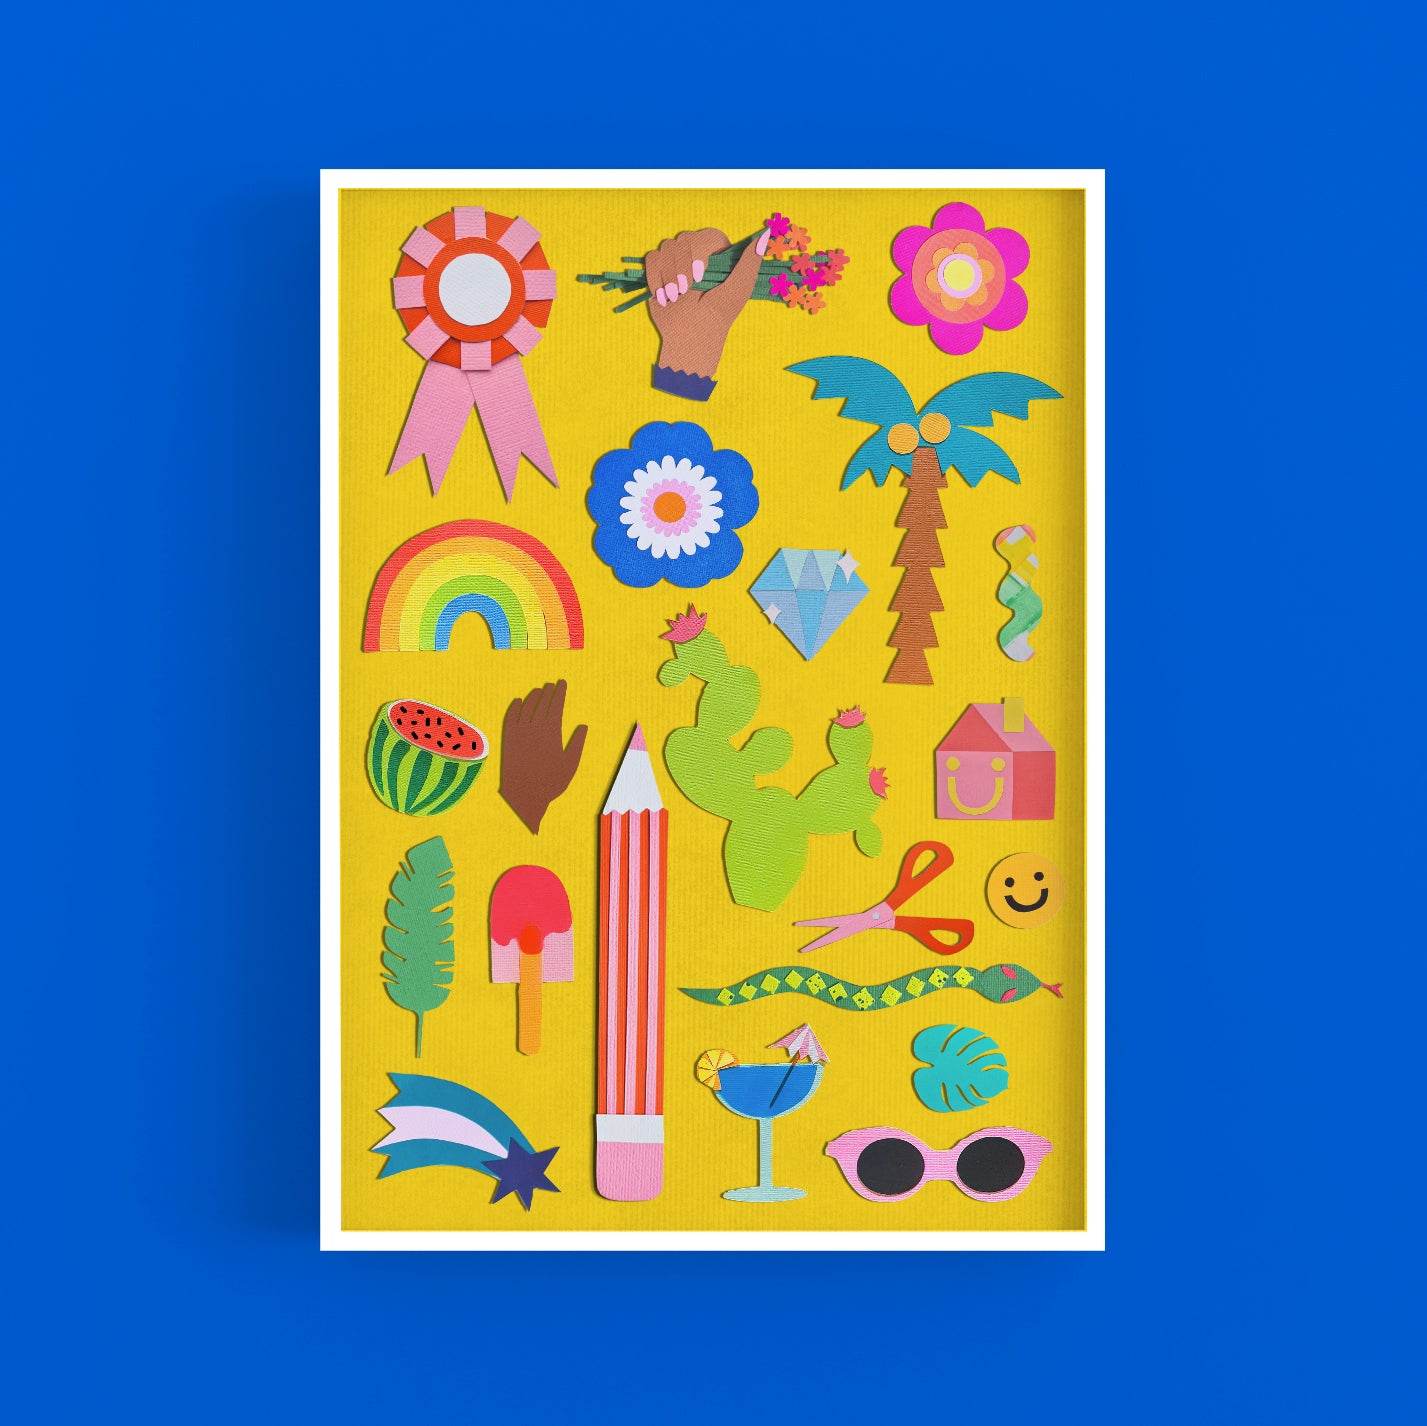 A colourful A3 art print of a papercraft collage depicting various motifs and shapes cut from coloured cardstock, on a yellow background. The print sits in a white frame on a bright blue background.